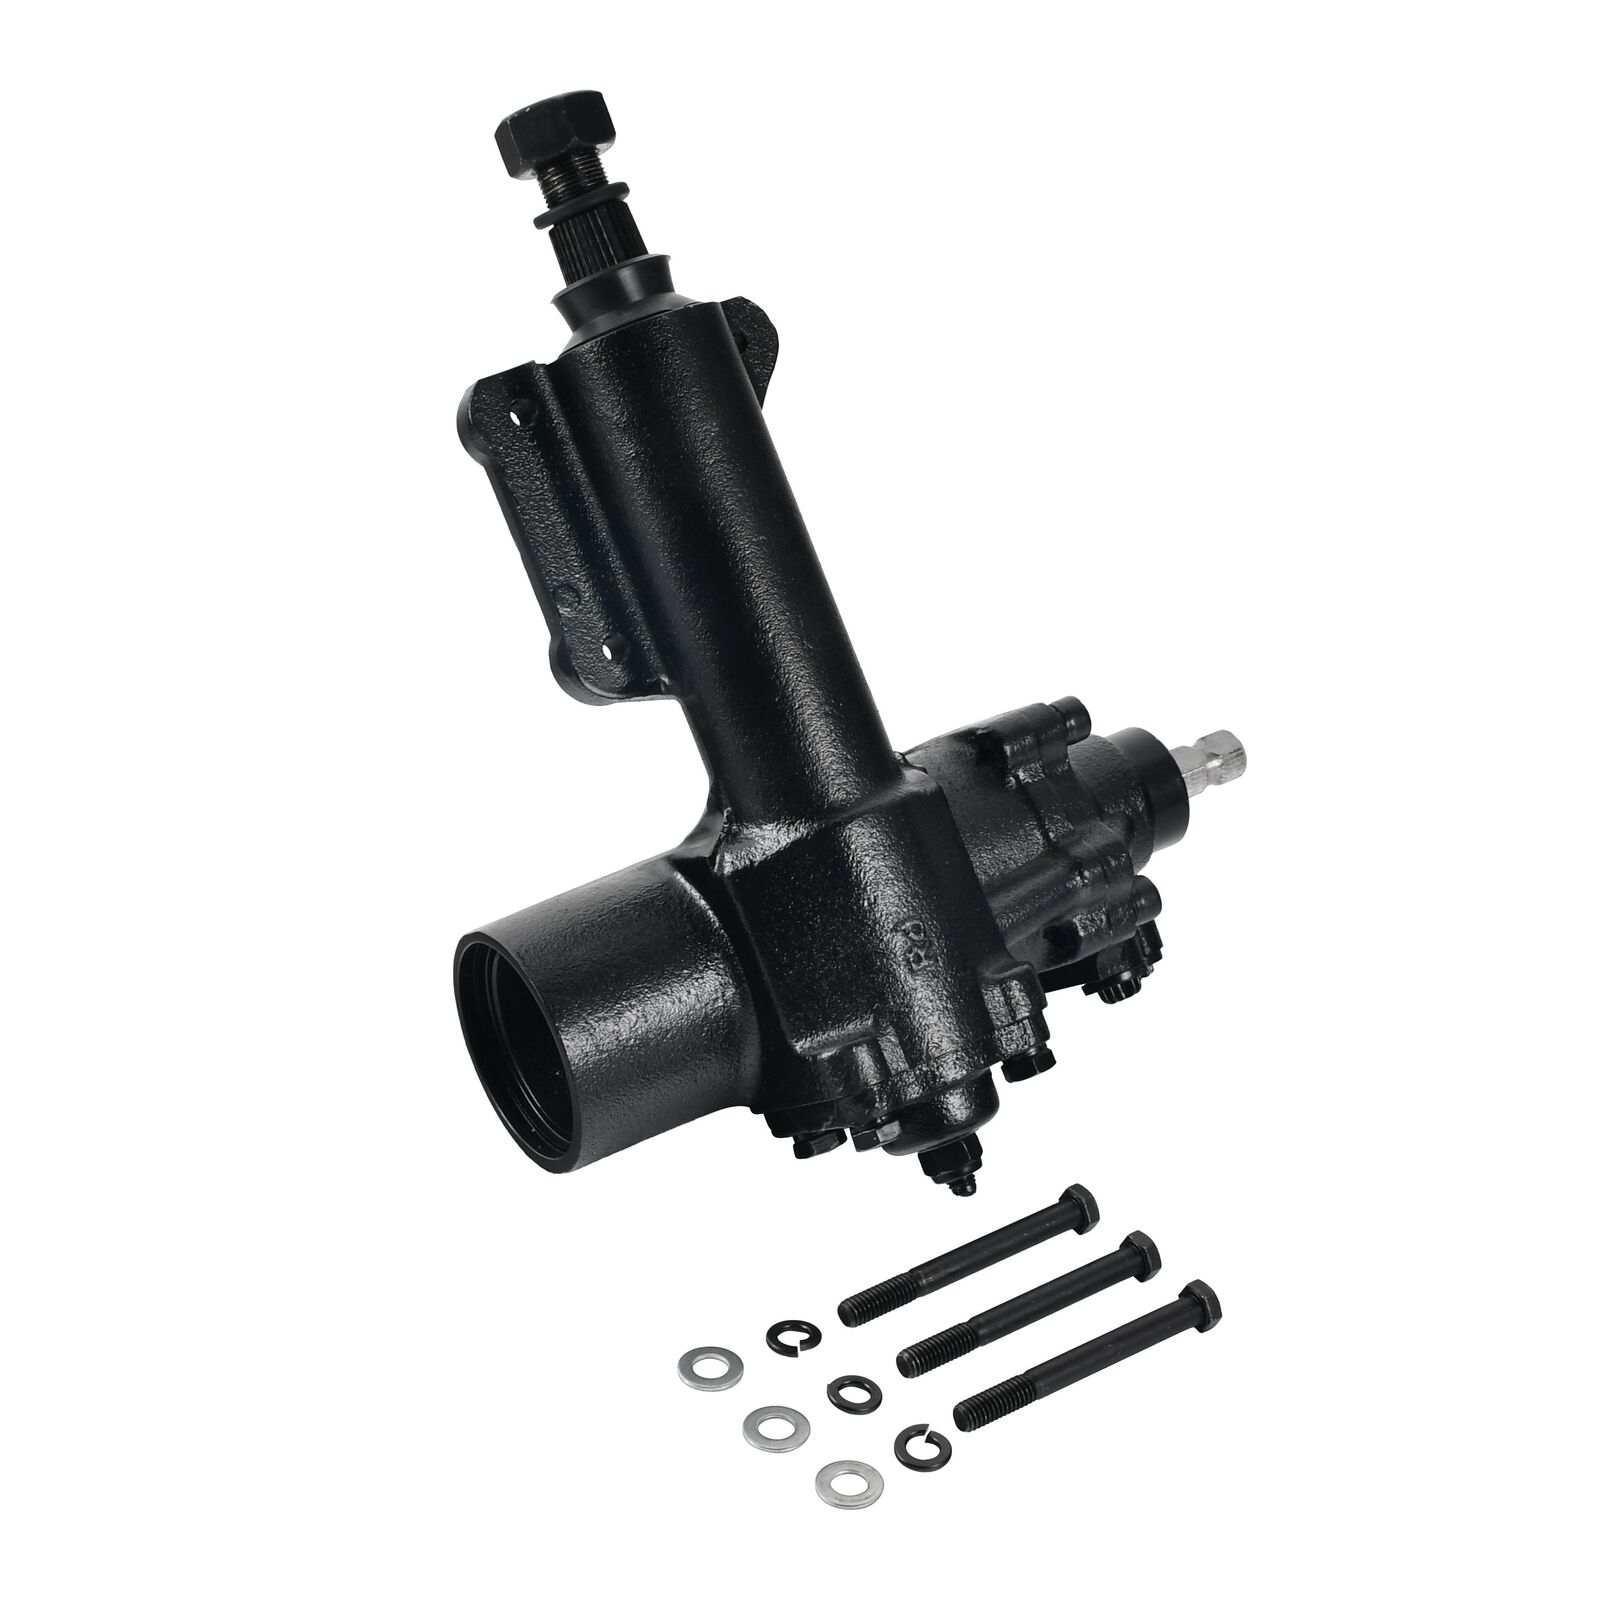 Power Steering Gear Box for 1955-57 Chevy Bel Air 150 210 500 Series Quick Ratio